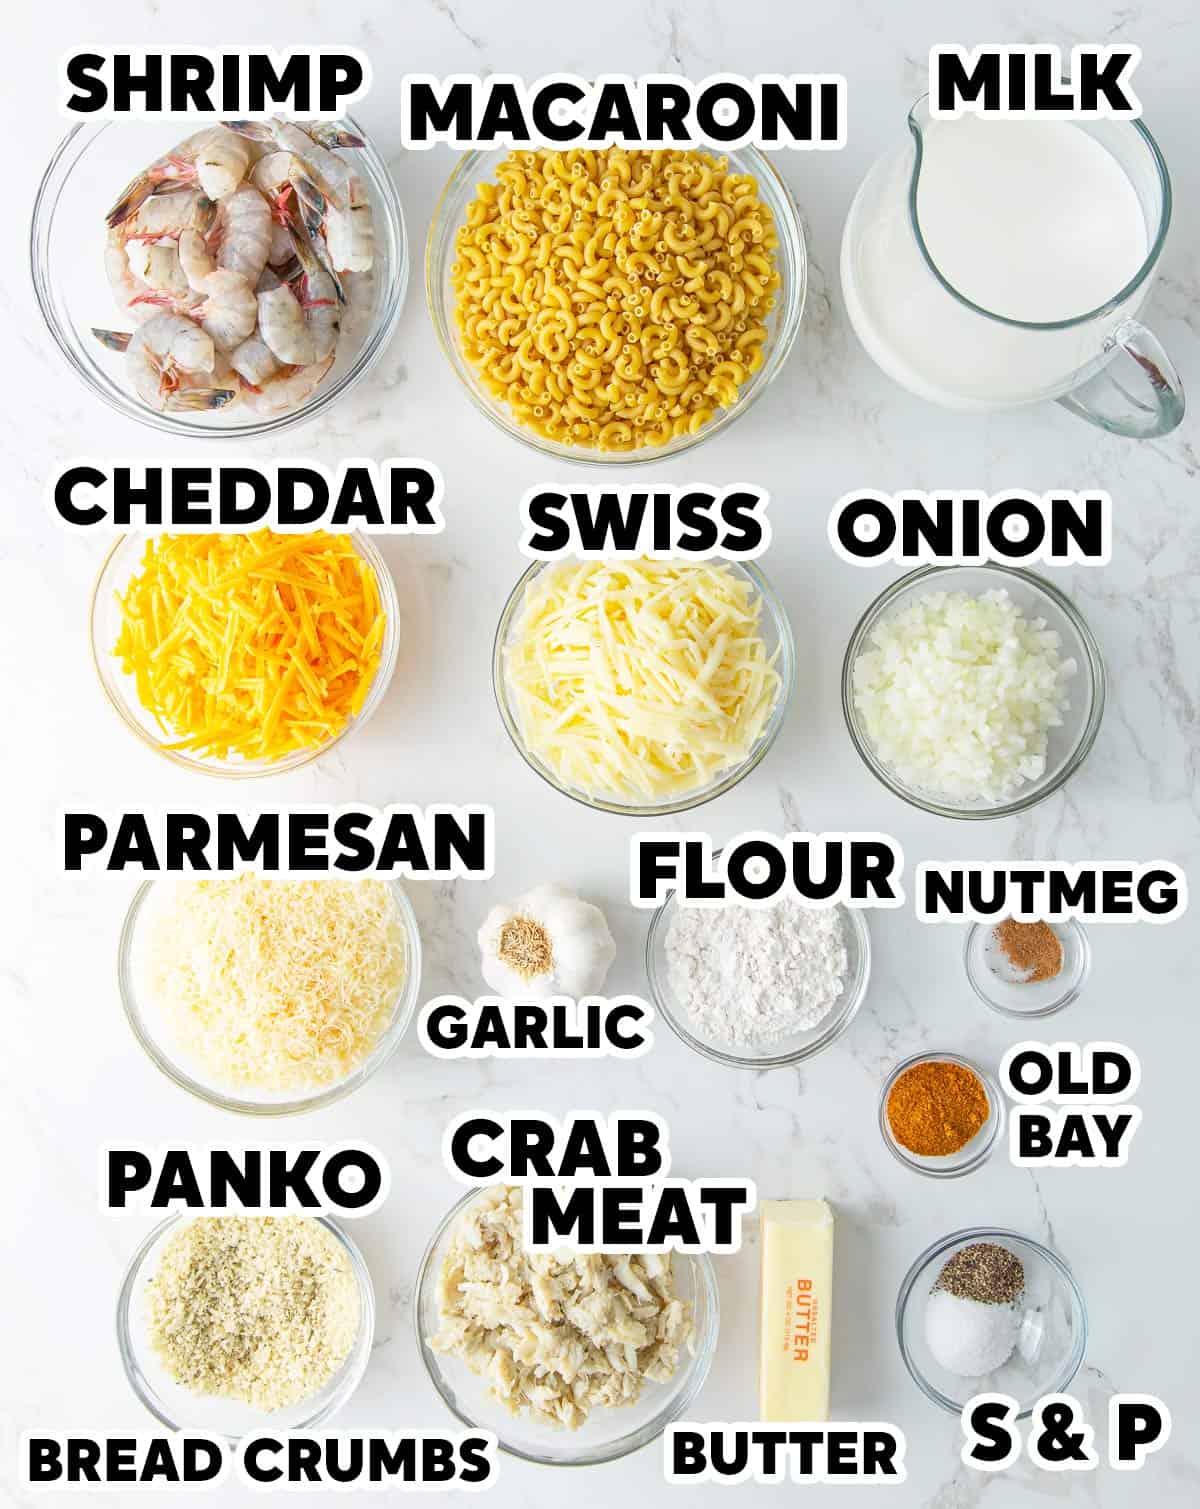 Overhead view of ingredients needed for seafood mac and cheese with overlay text.